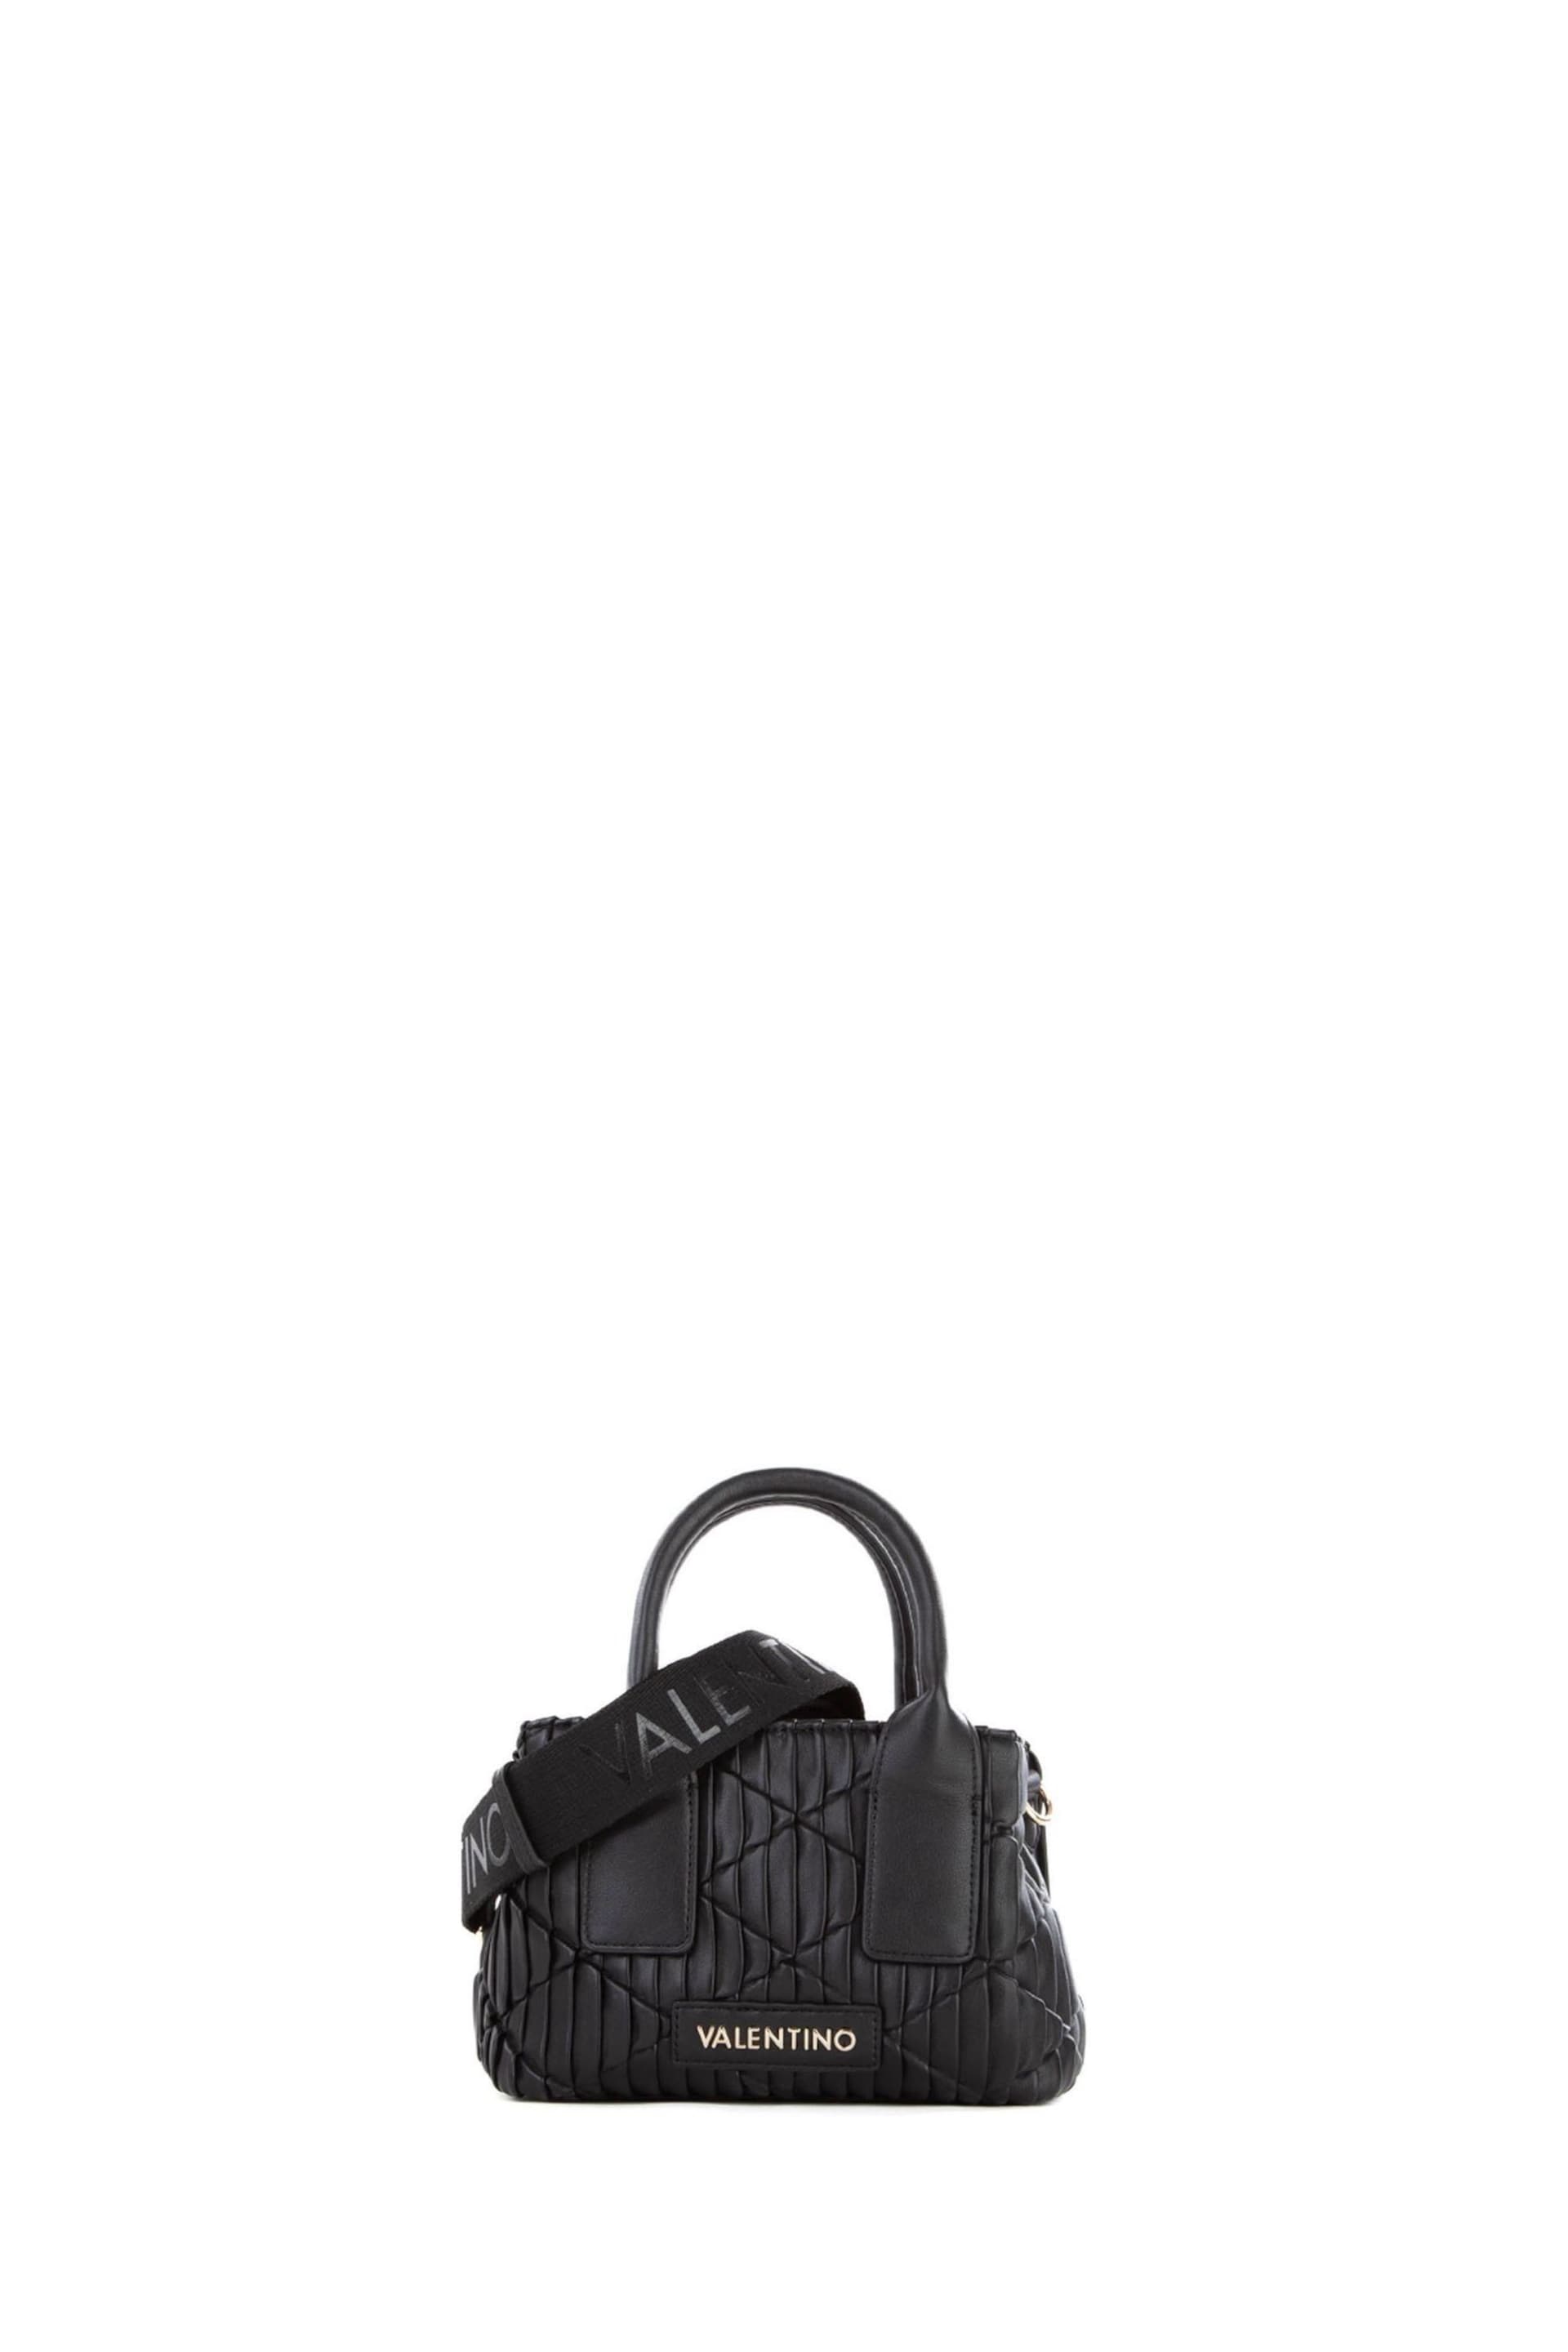 Valentino Bags Black Clapham Chain Strap Top Handle Bag - Image 5 of 5